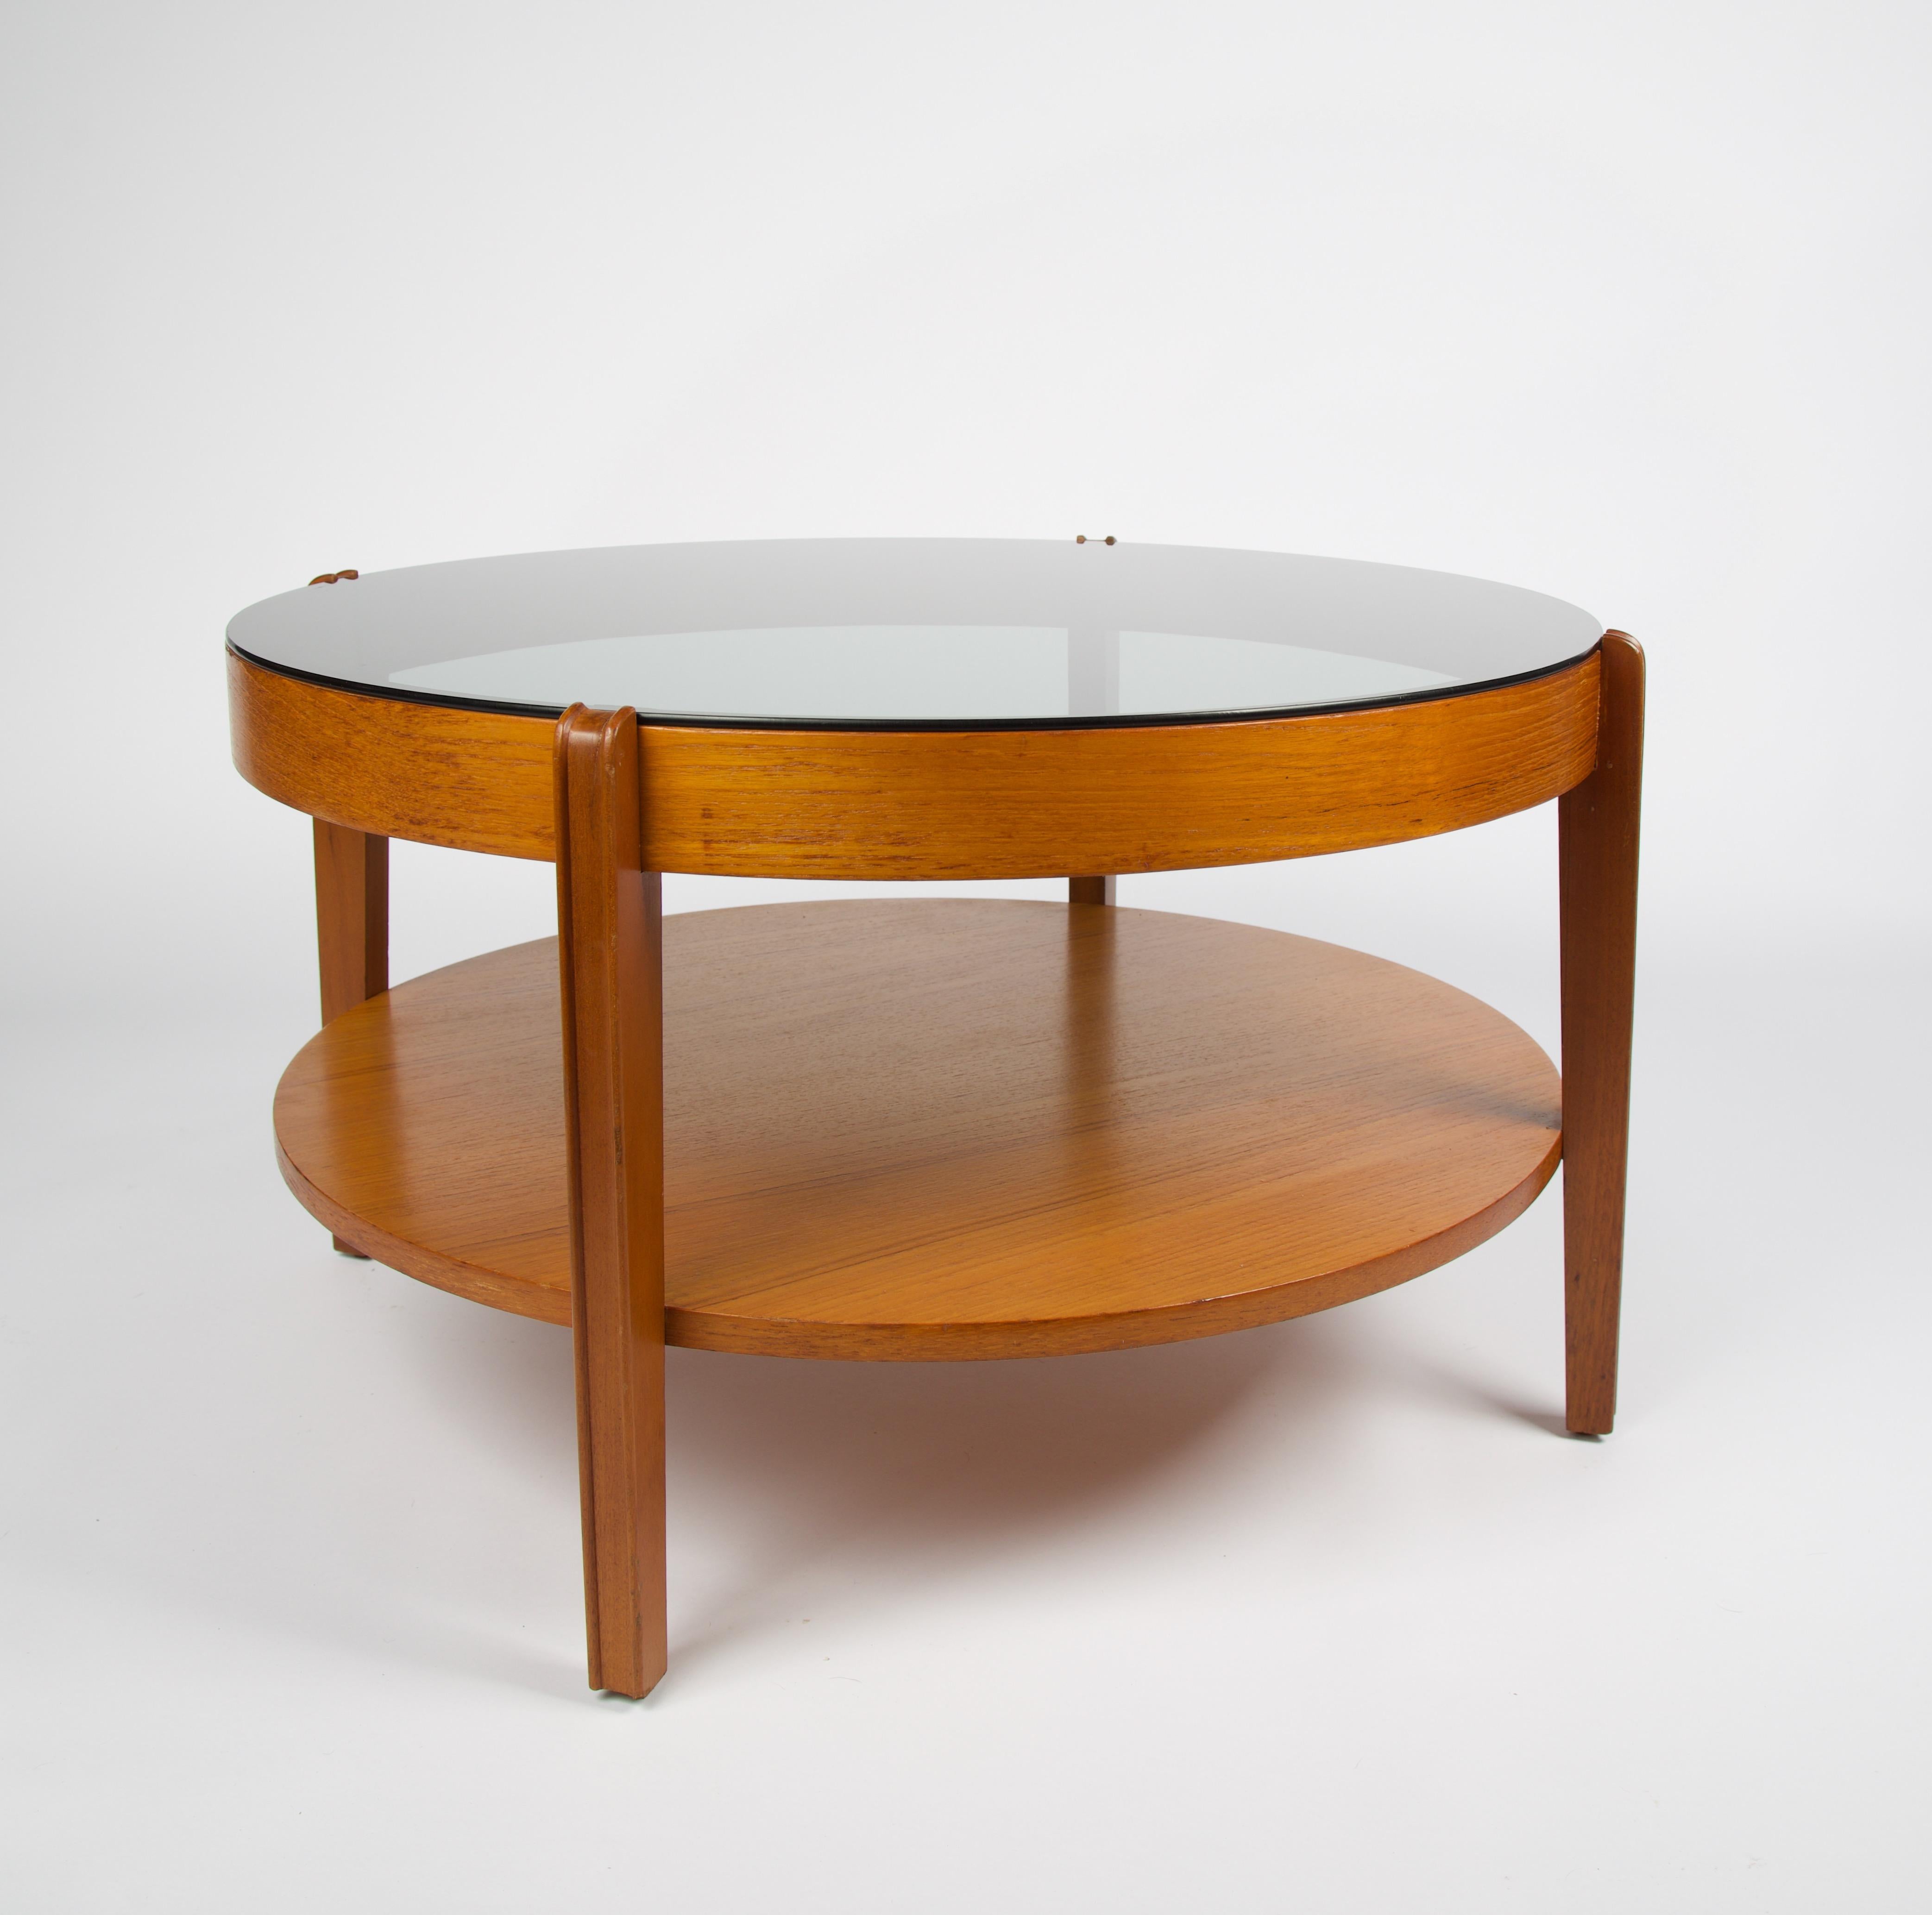 Mid-Century Modern round teak coffee table with smoked glass by Remploy of England.

Remploy was set up under the 1944 Disabled Persons Employment Act by Ernest Bevin, who was then minister of labour; to become yet another plank in Welfare State